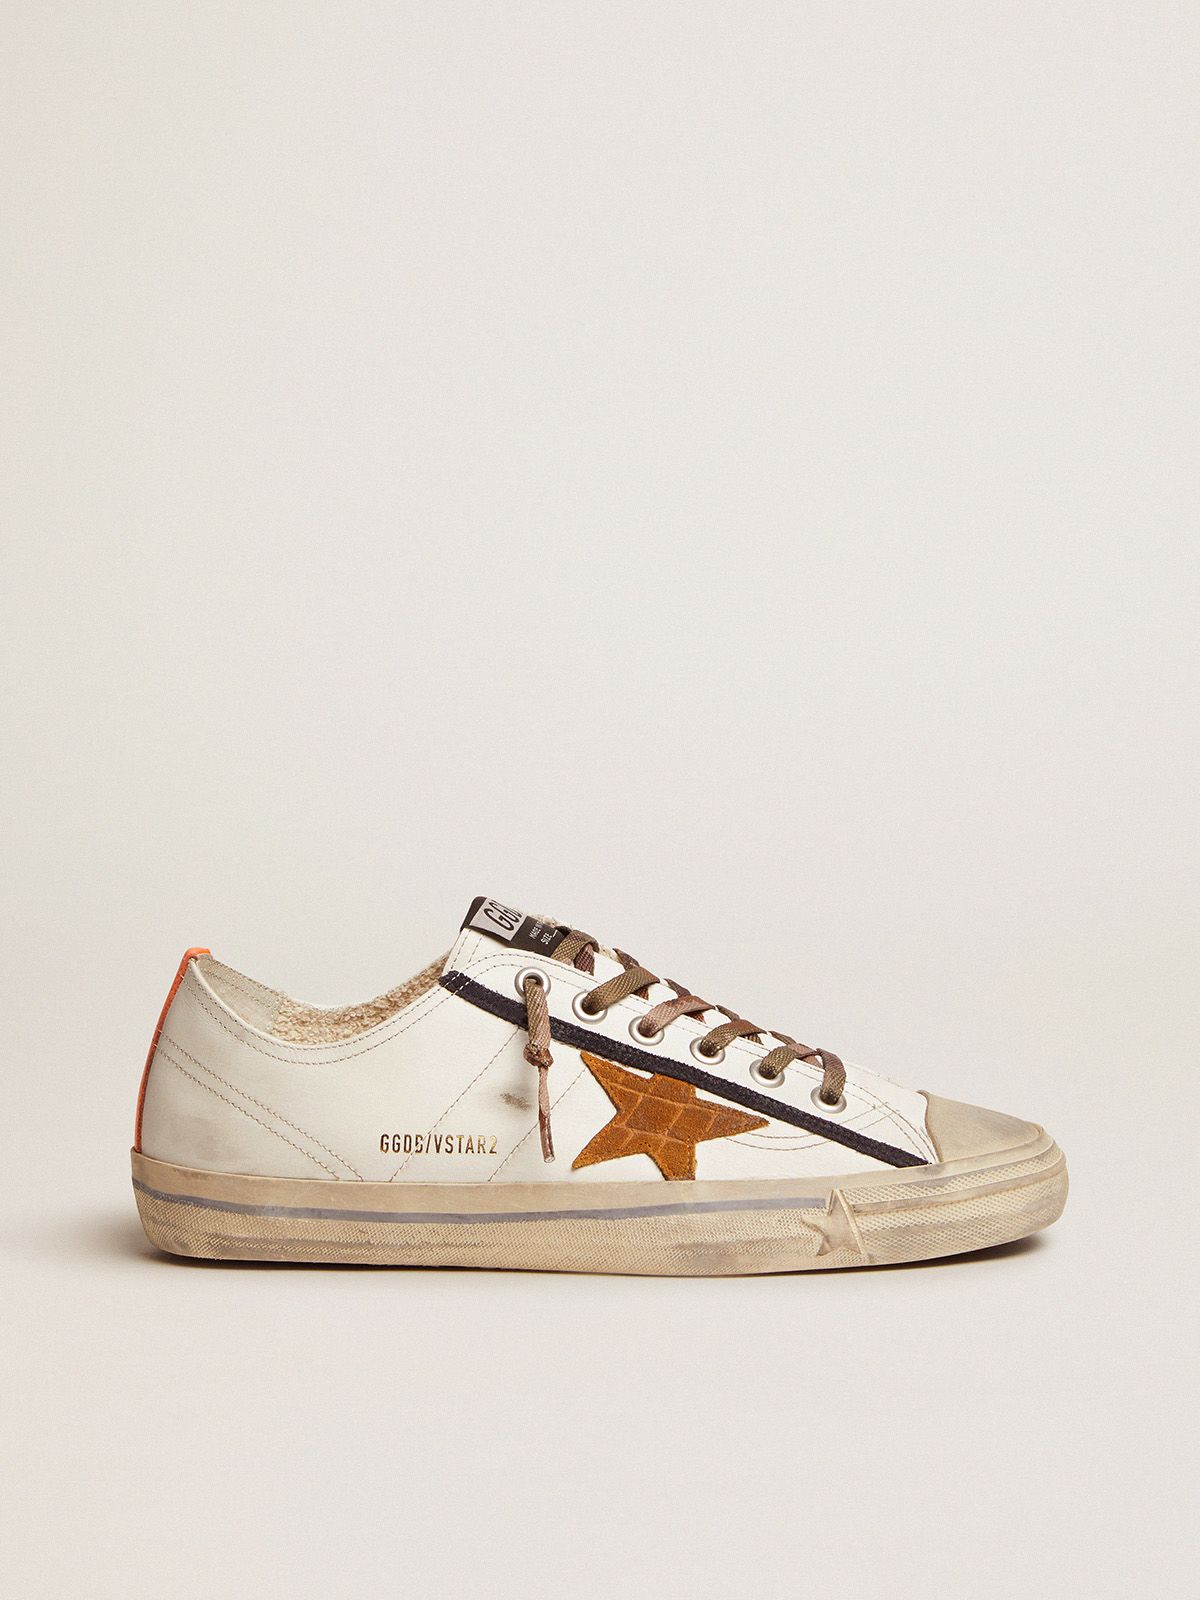 V-Star LTD sneakers in white leather with crocodile-print suede star